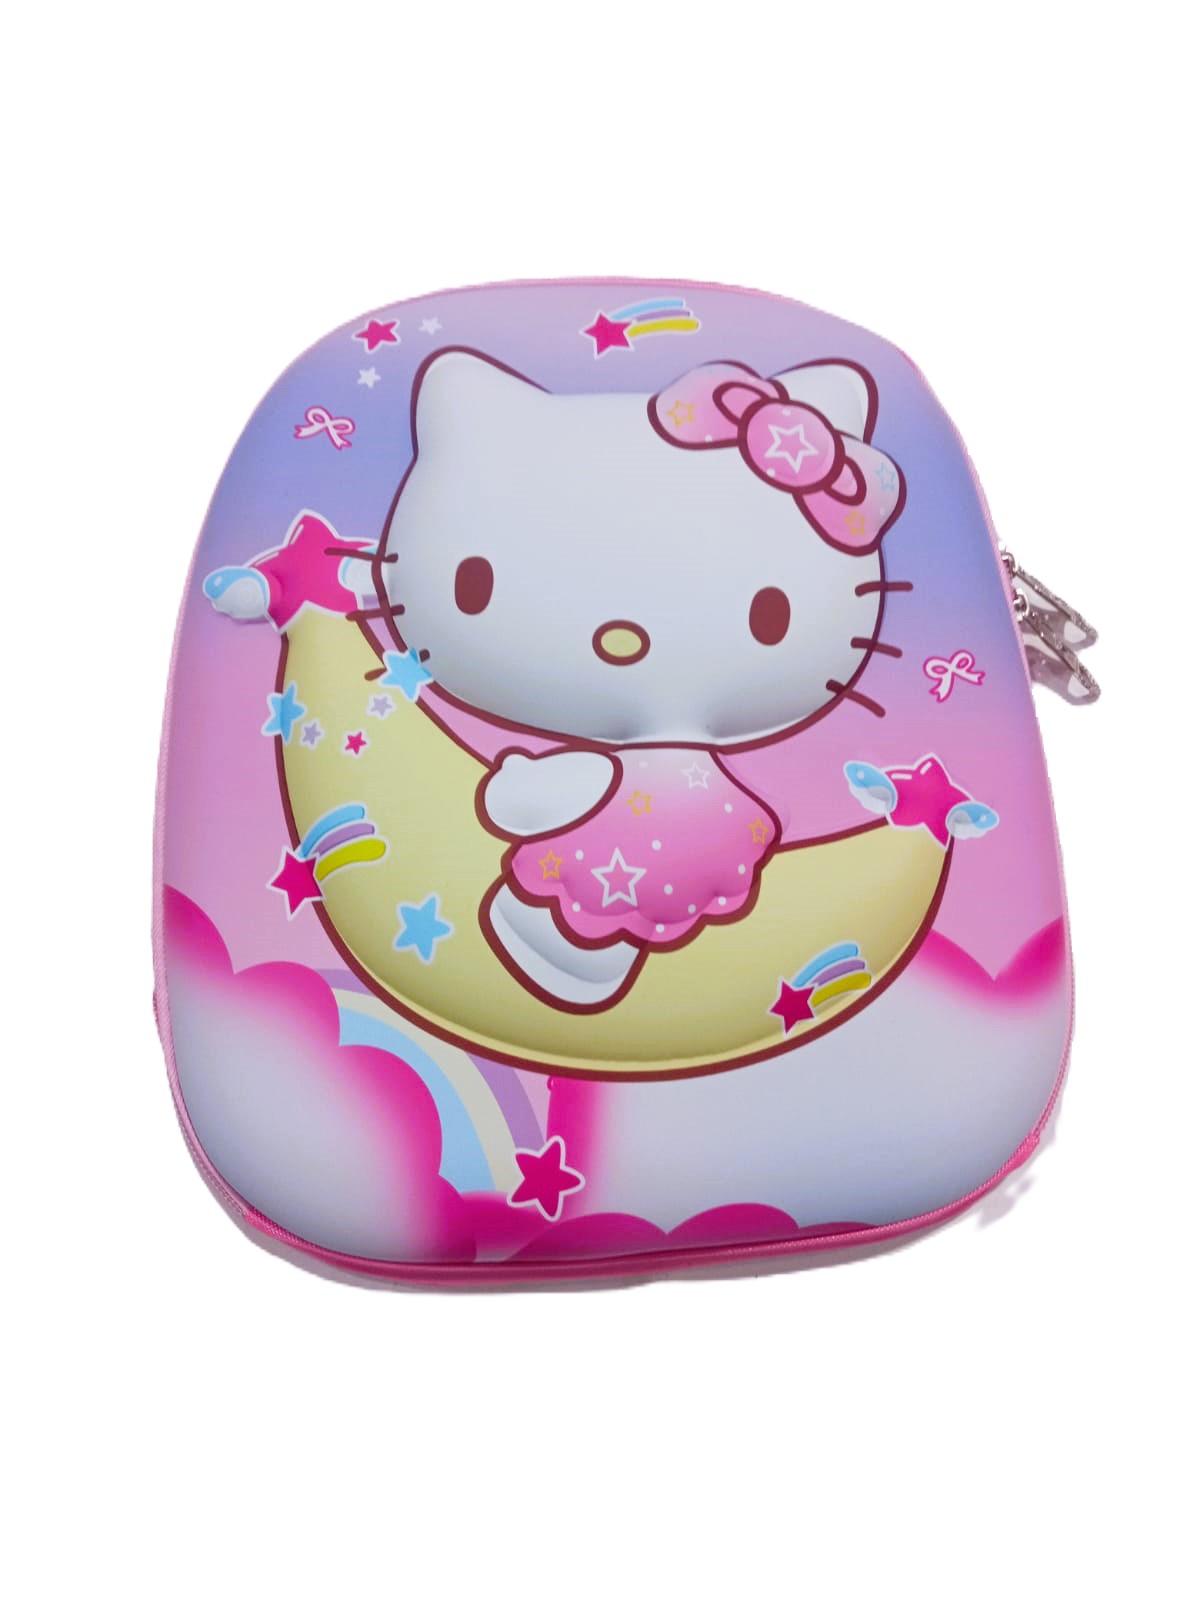 Hard-Case mini bags for kids (Hello Kitty Edition)